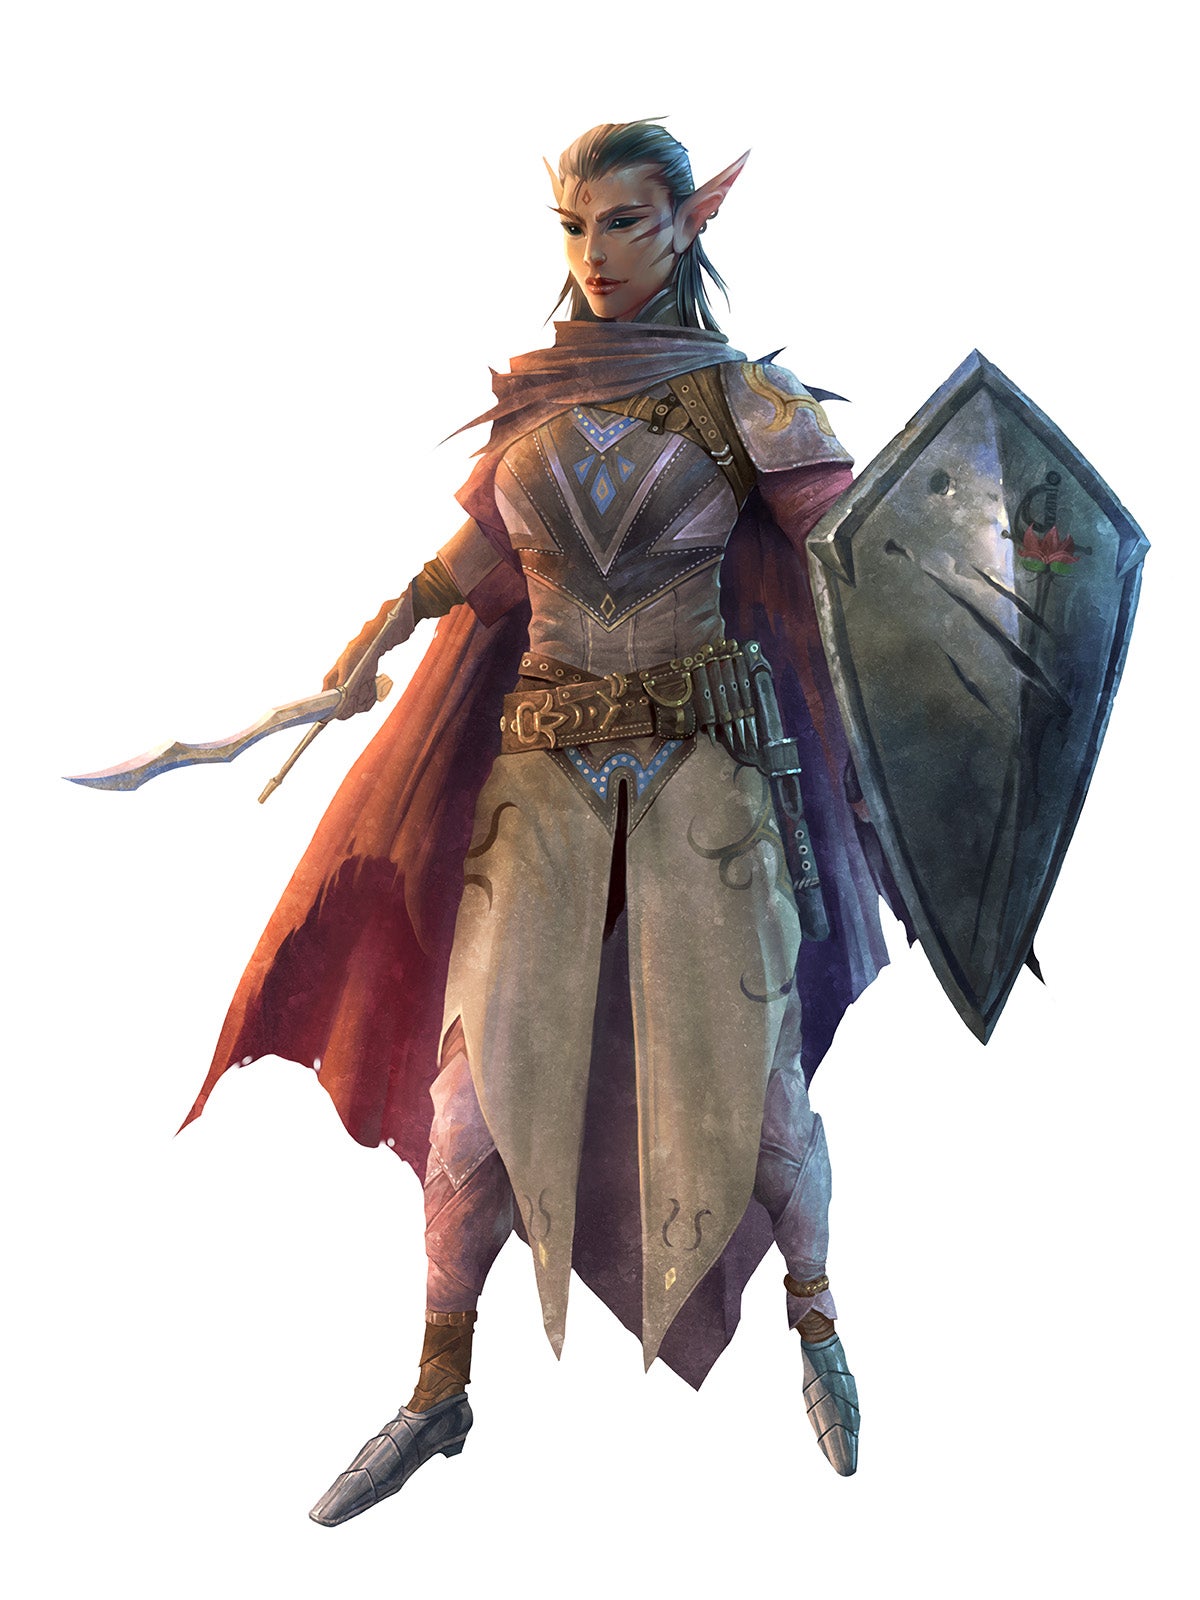 This is the knight vigilant. She’s a noble knight wearing armor and a cloak. She’s carrying a sword and shield with the holy symbol of Milani